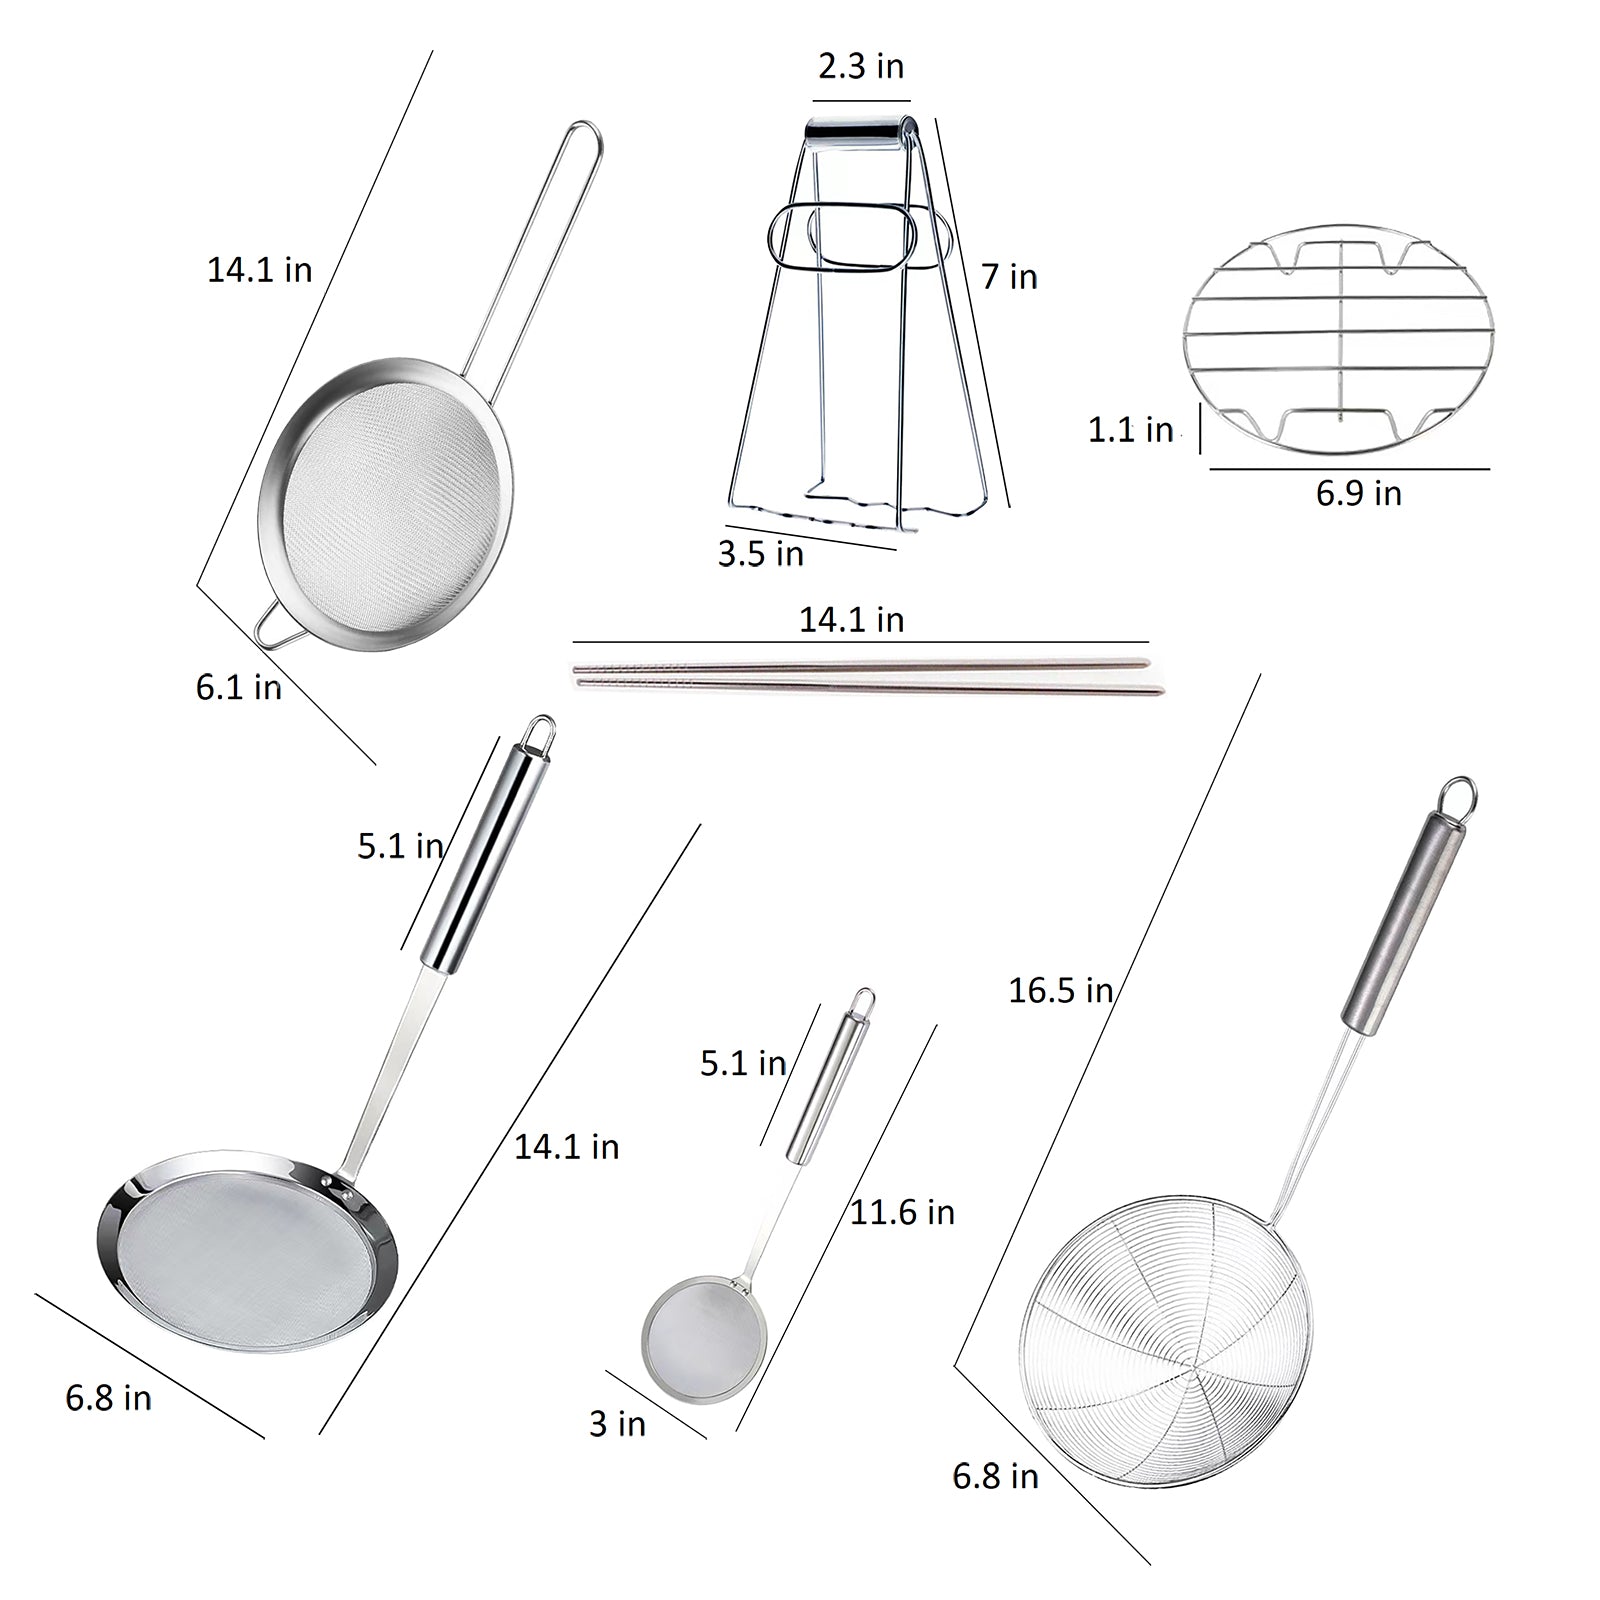 Kitchen Utensils Dimensions & Drawings